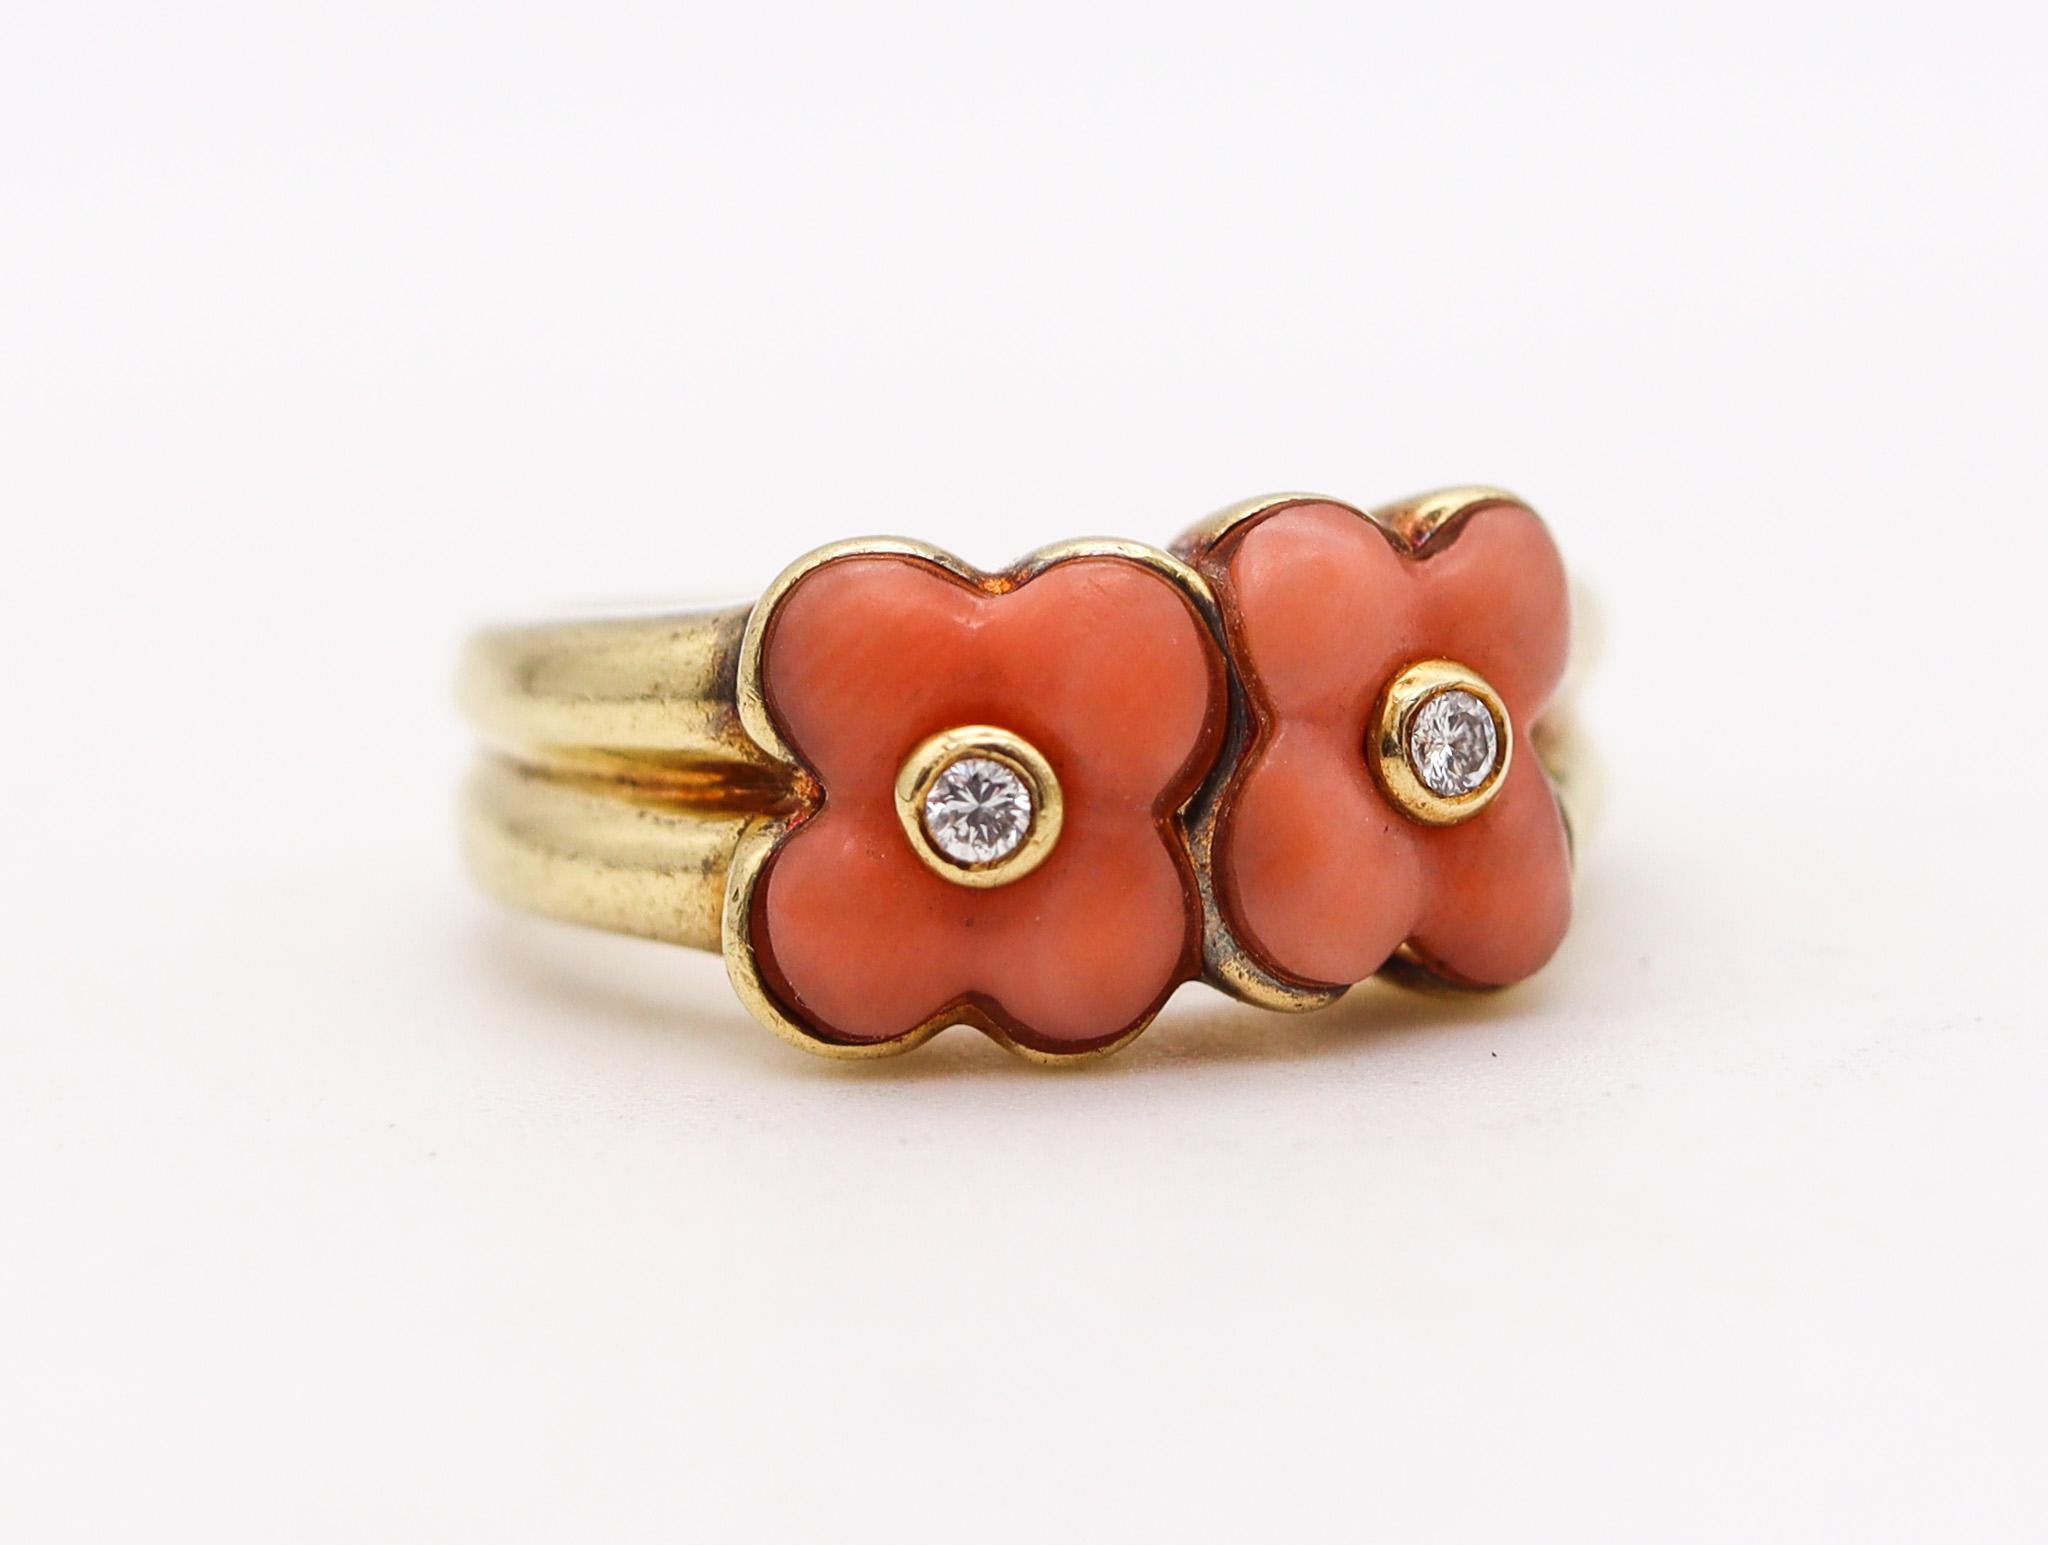 Flowers ring designed by Van Cleef & Arpels.

Very beautiful and delicate ring, created by the jewelry house of Van Cleef & Arpels, back in the 1970's. This unusual vintage flowers ring has been crafted in solid yellow gold of 18 karats with high